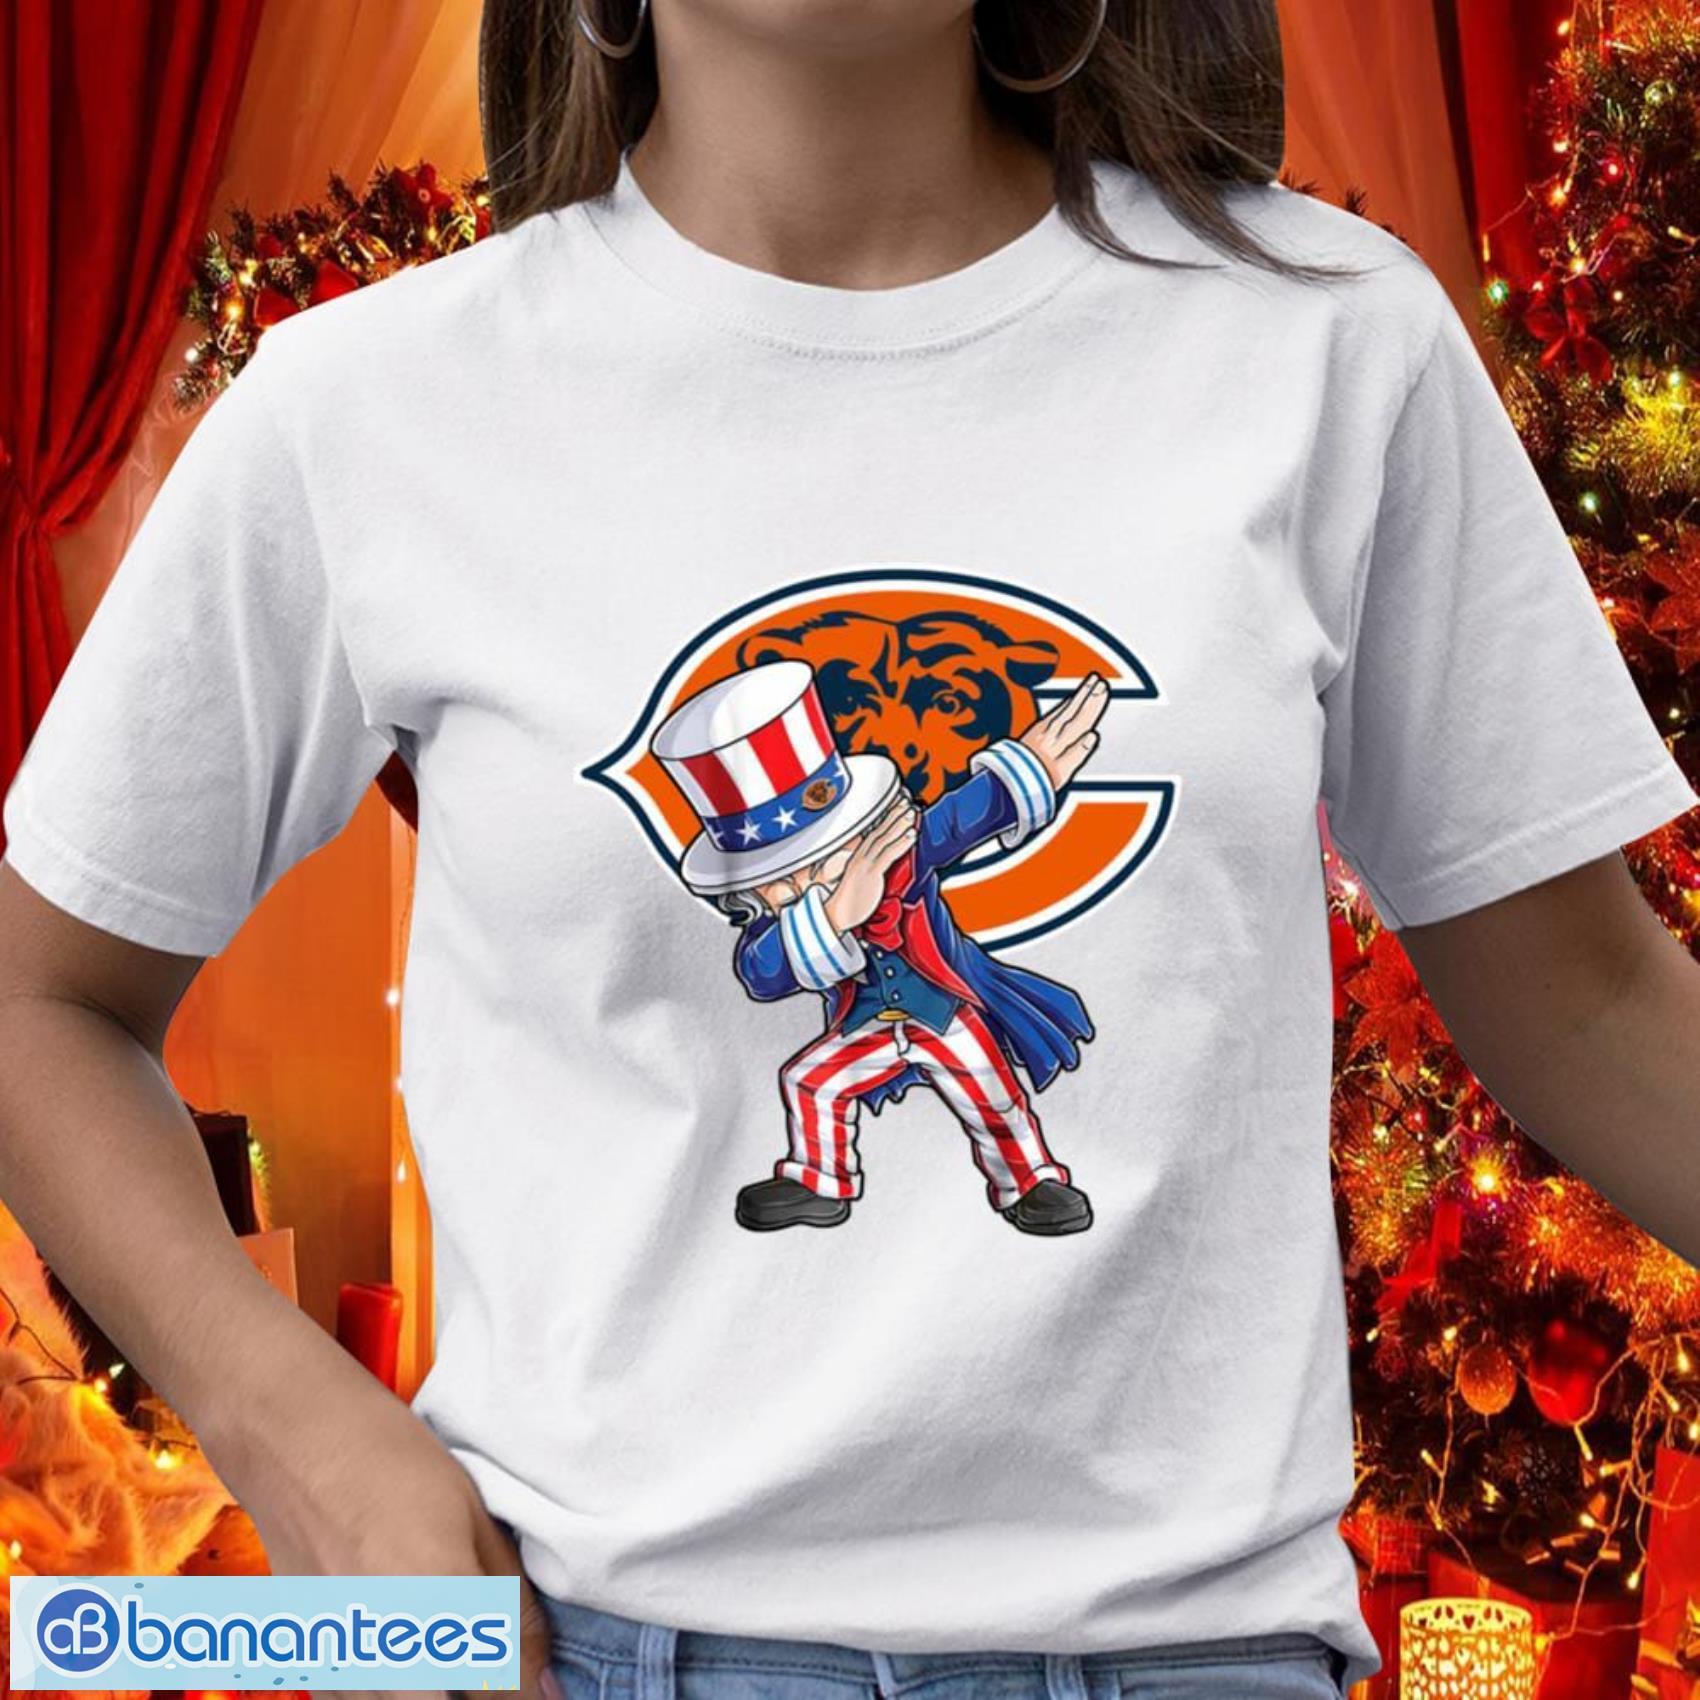 Chicago Bears NFL Football Gift Fr Fans Dabbing Uncle Sam The Fourth of July T Shirt - Chicago Bears NFL Football Dabbing Uncle Sam The Fourth of July T Shirt_1